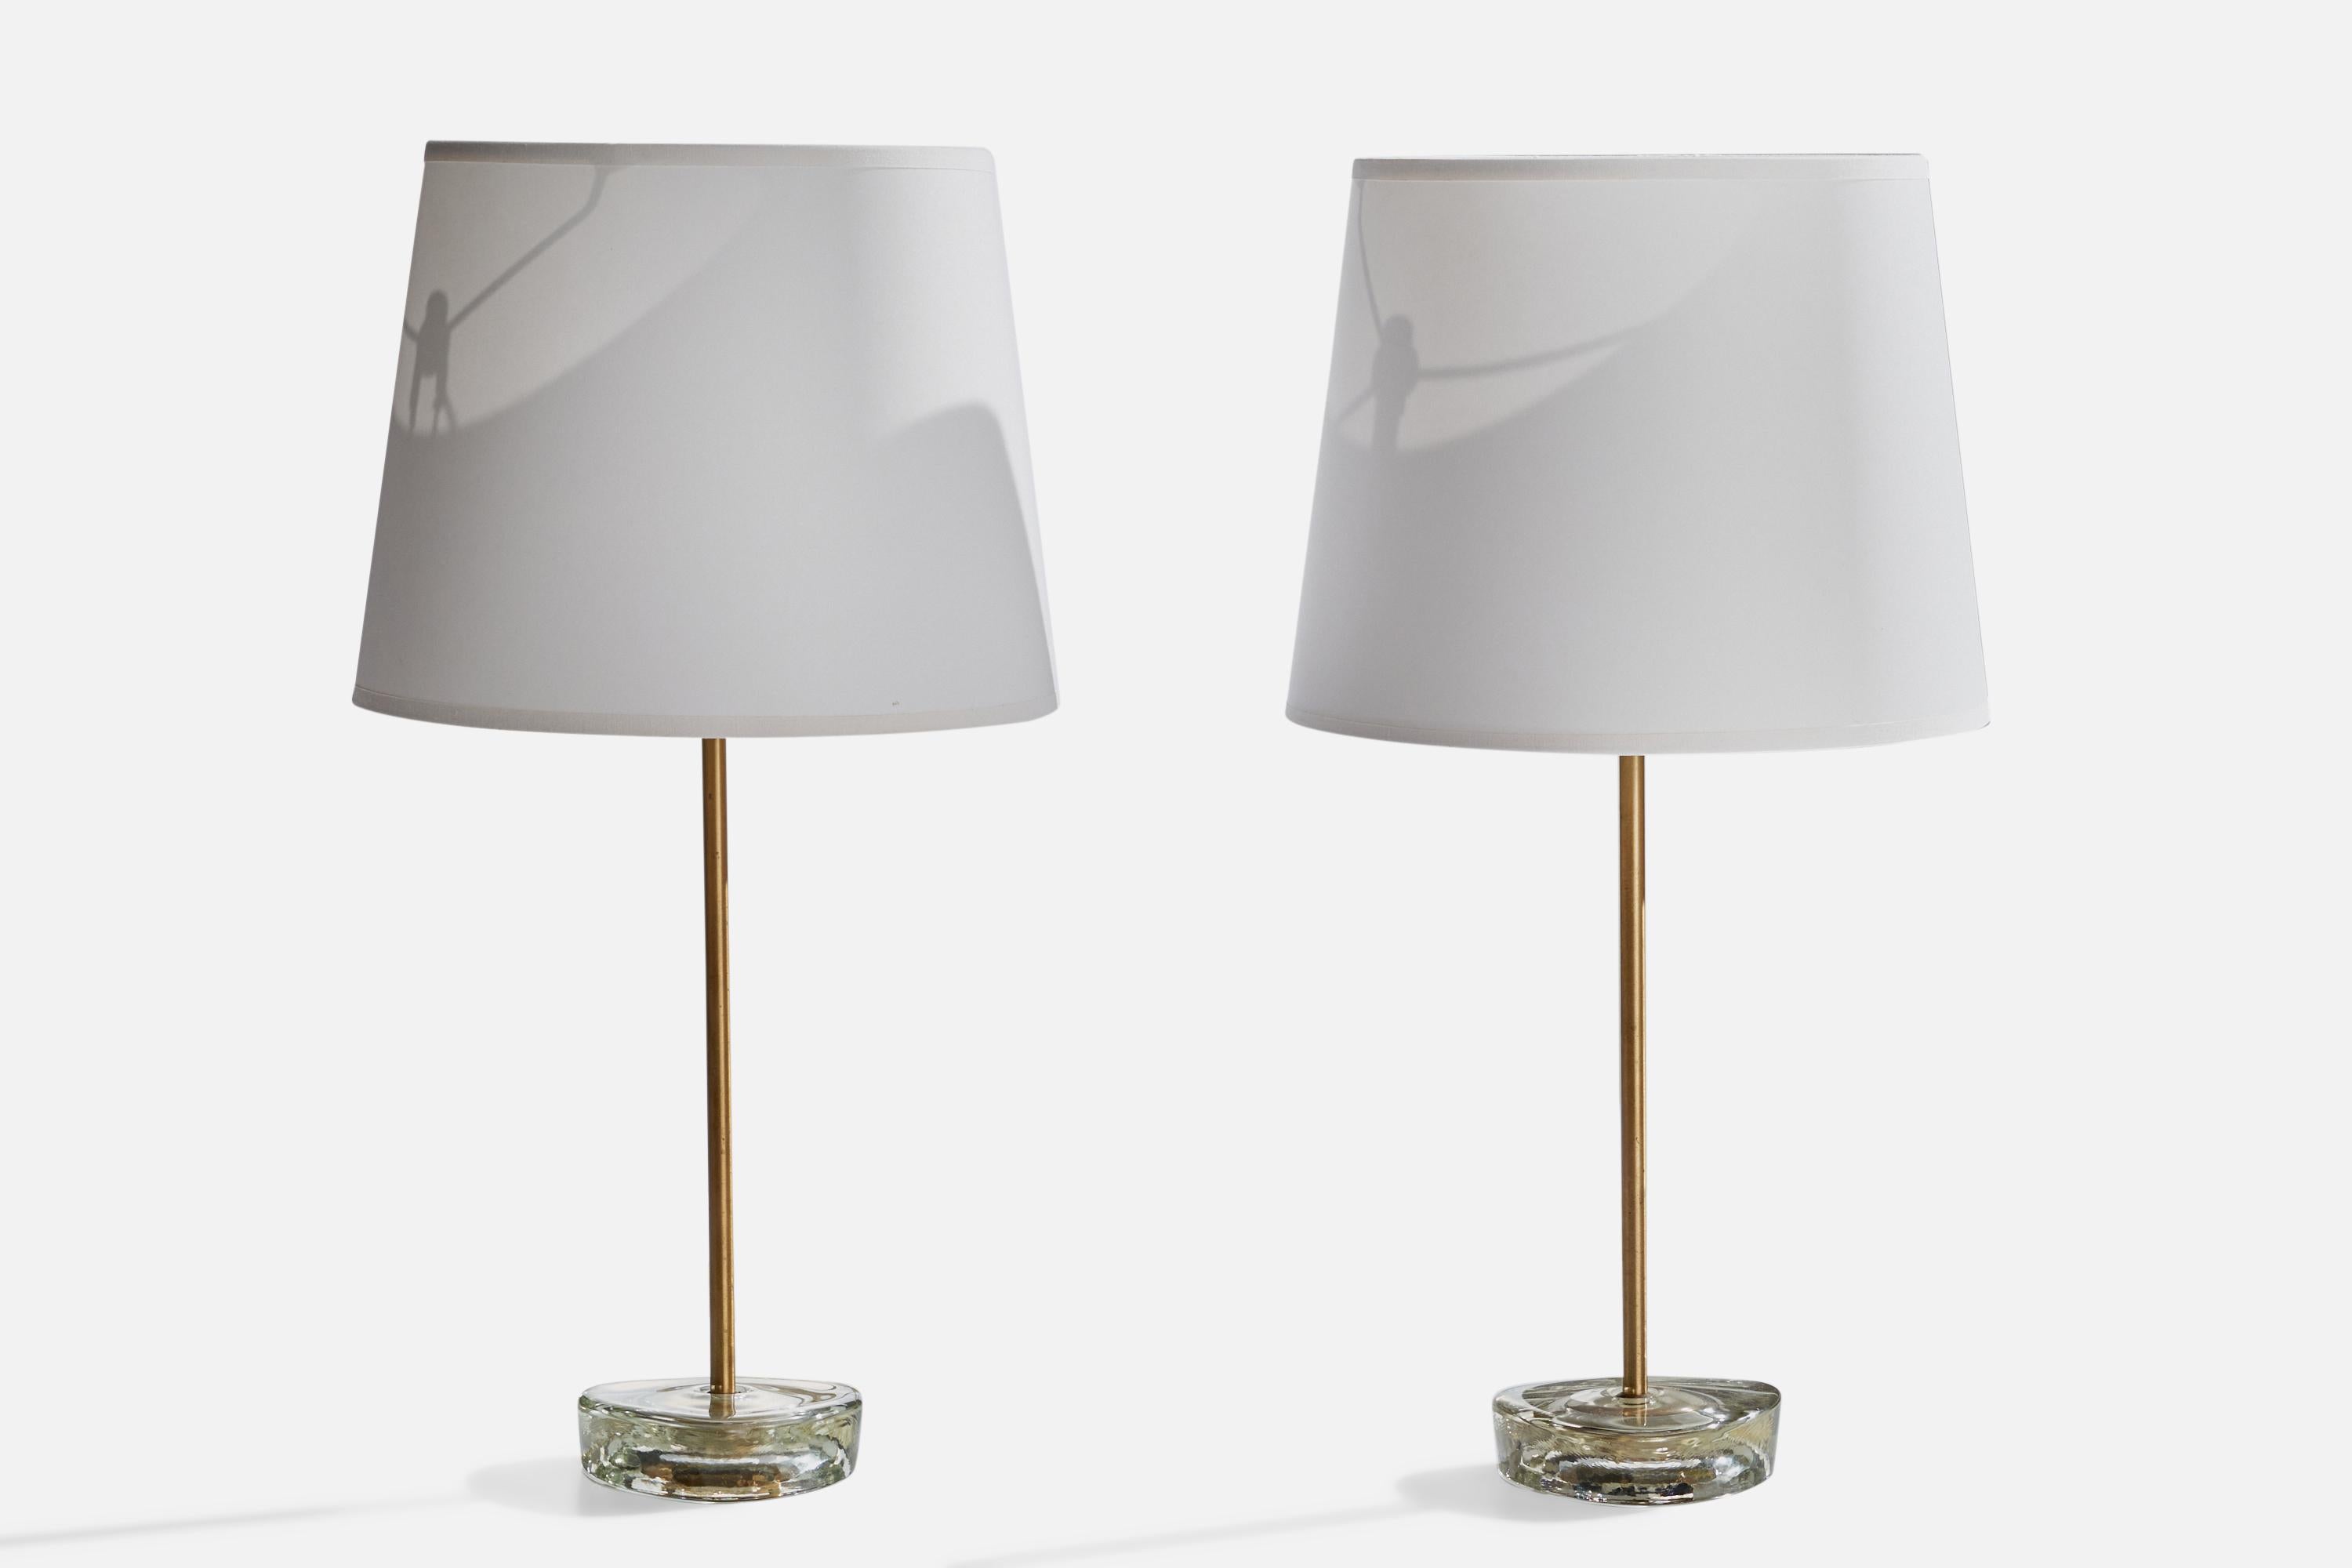 A pair of brass and glass table lamps designed and produced by ANF Nybro Armaturfabrik, Sweden, c. 1960s.

Dimensions of Lamp (inches): 13.5” H x 4.25”  Diameter
Dimensions of Shade (inches): 7.75” Top Diameter x 10”  Bottom Diameter x 8”